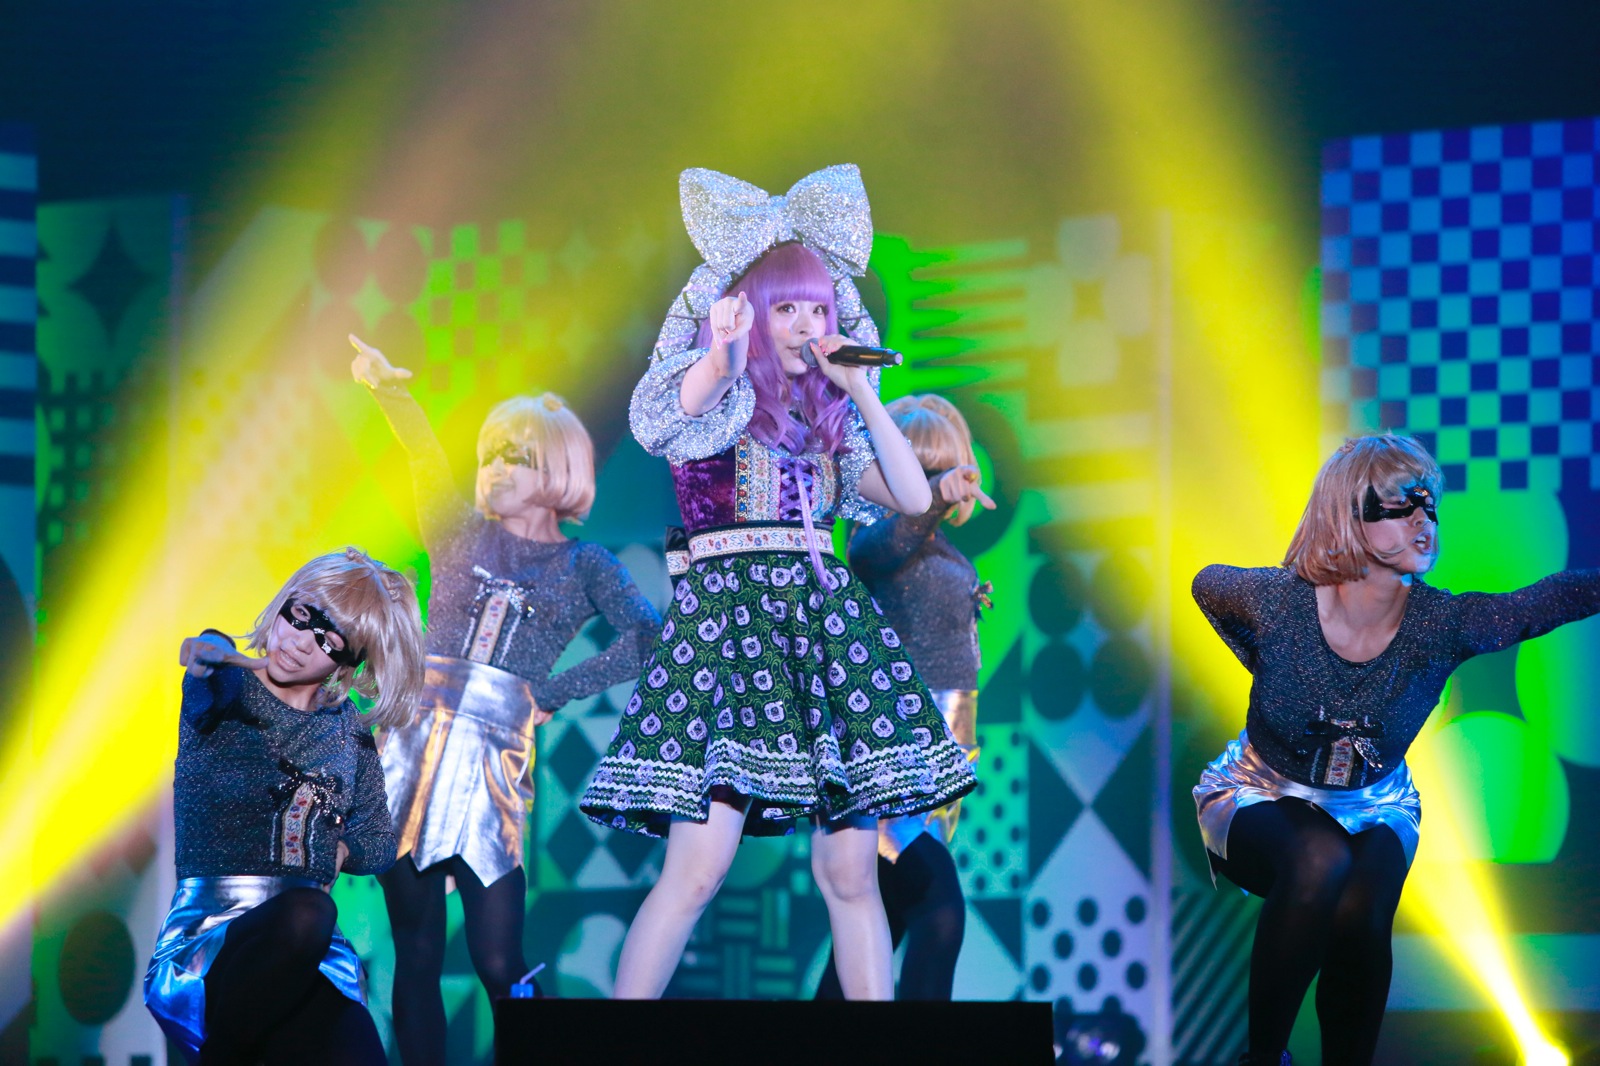 MOSHI MOSHI NIPPON FESTIVAL 2015 to be Held in Tokyo! Entrance Free for Non-Japanese